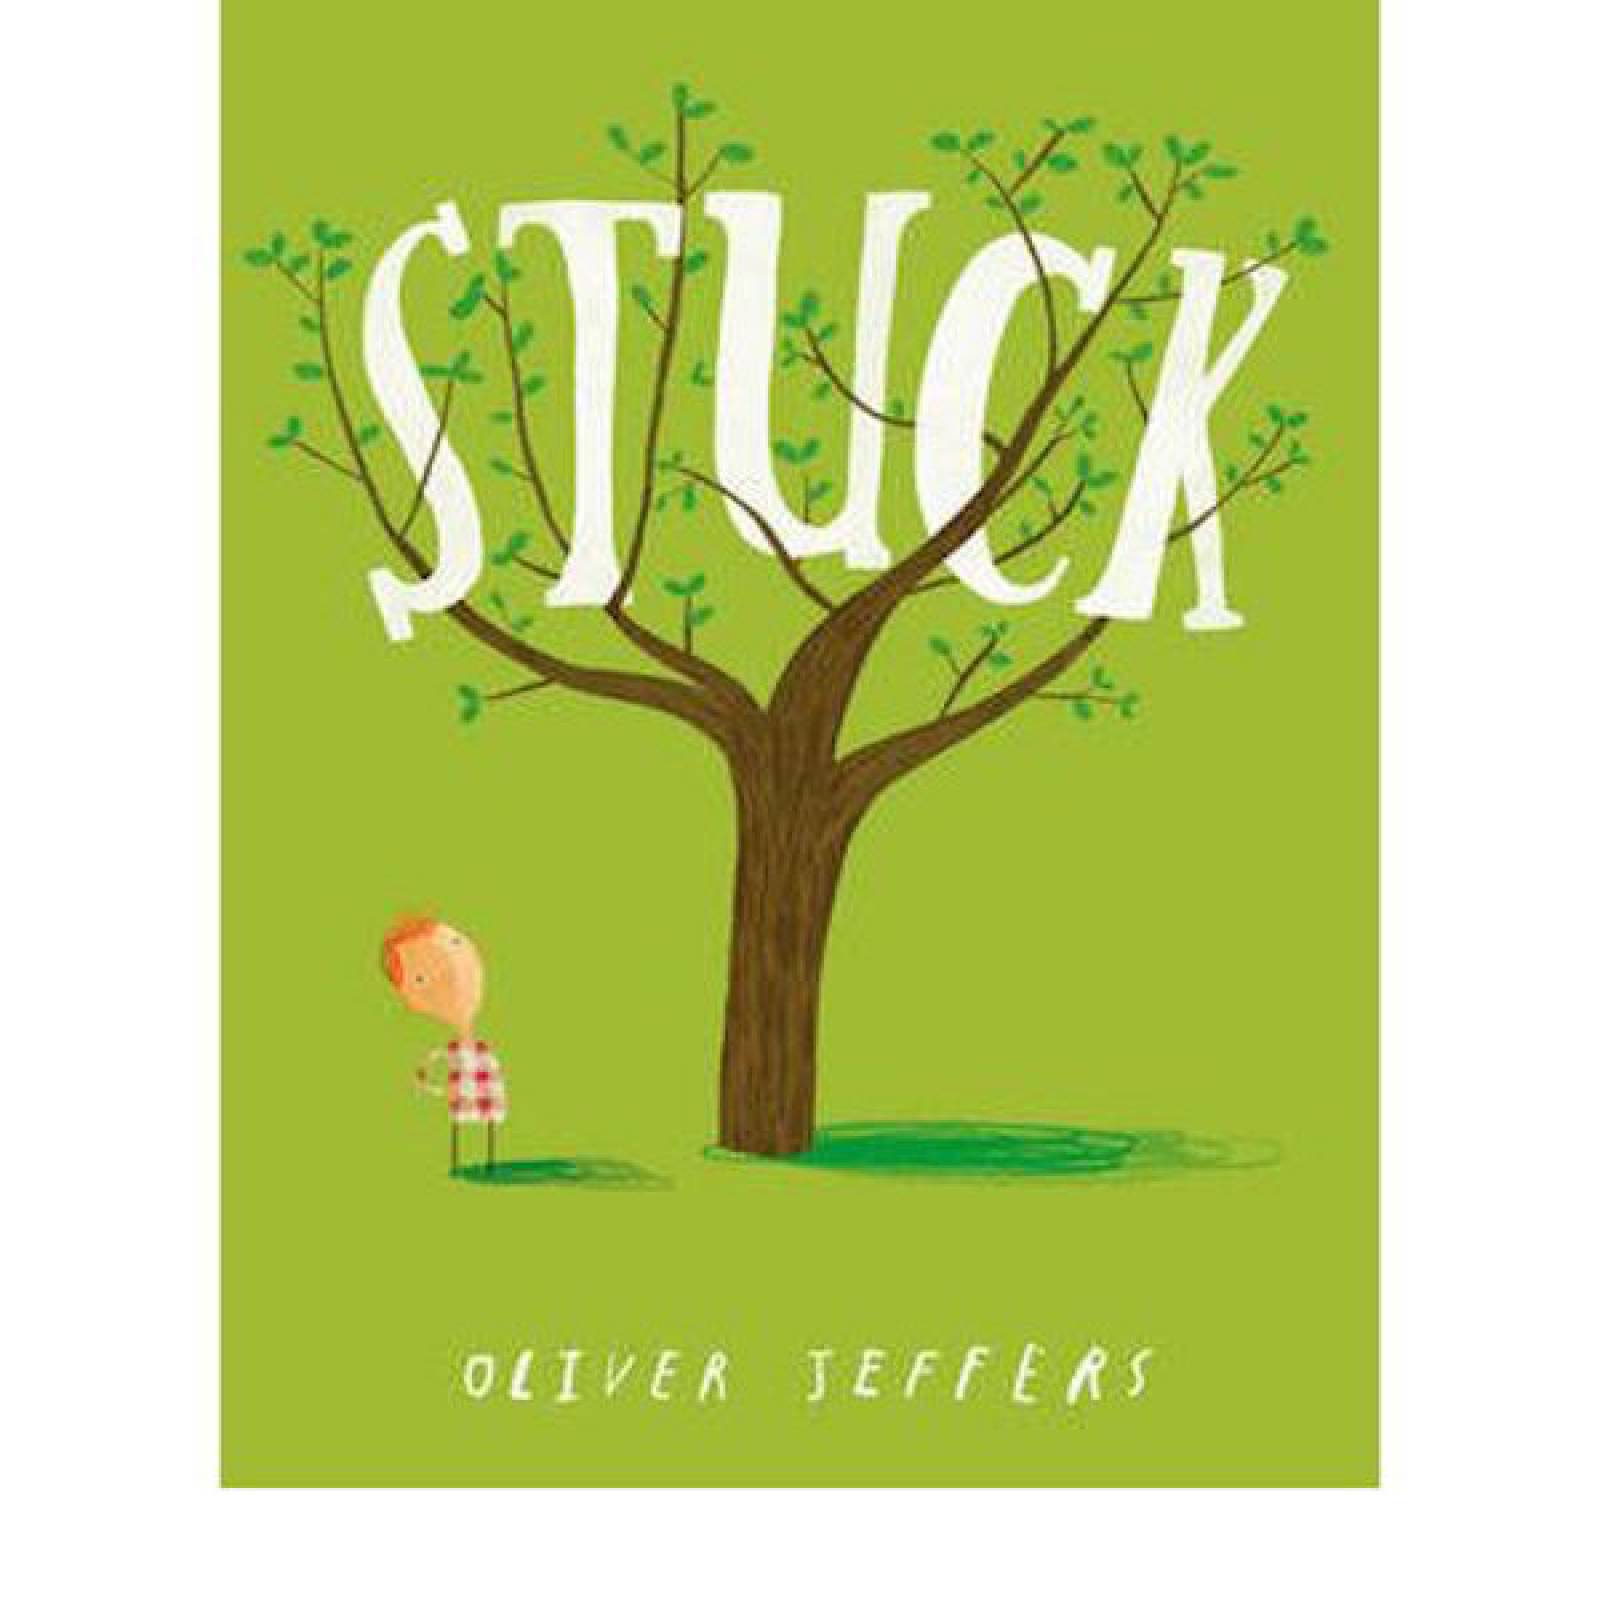 Stuck By Oliver Jeffers - Paperback Book